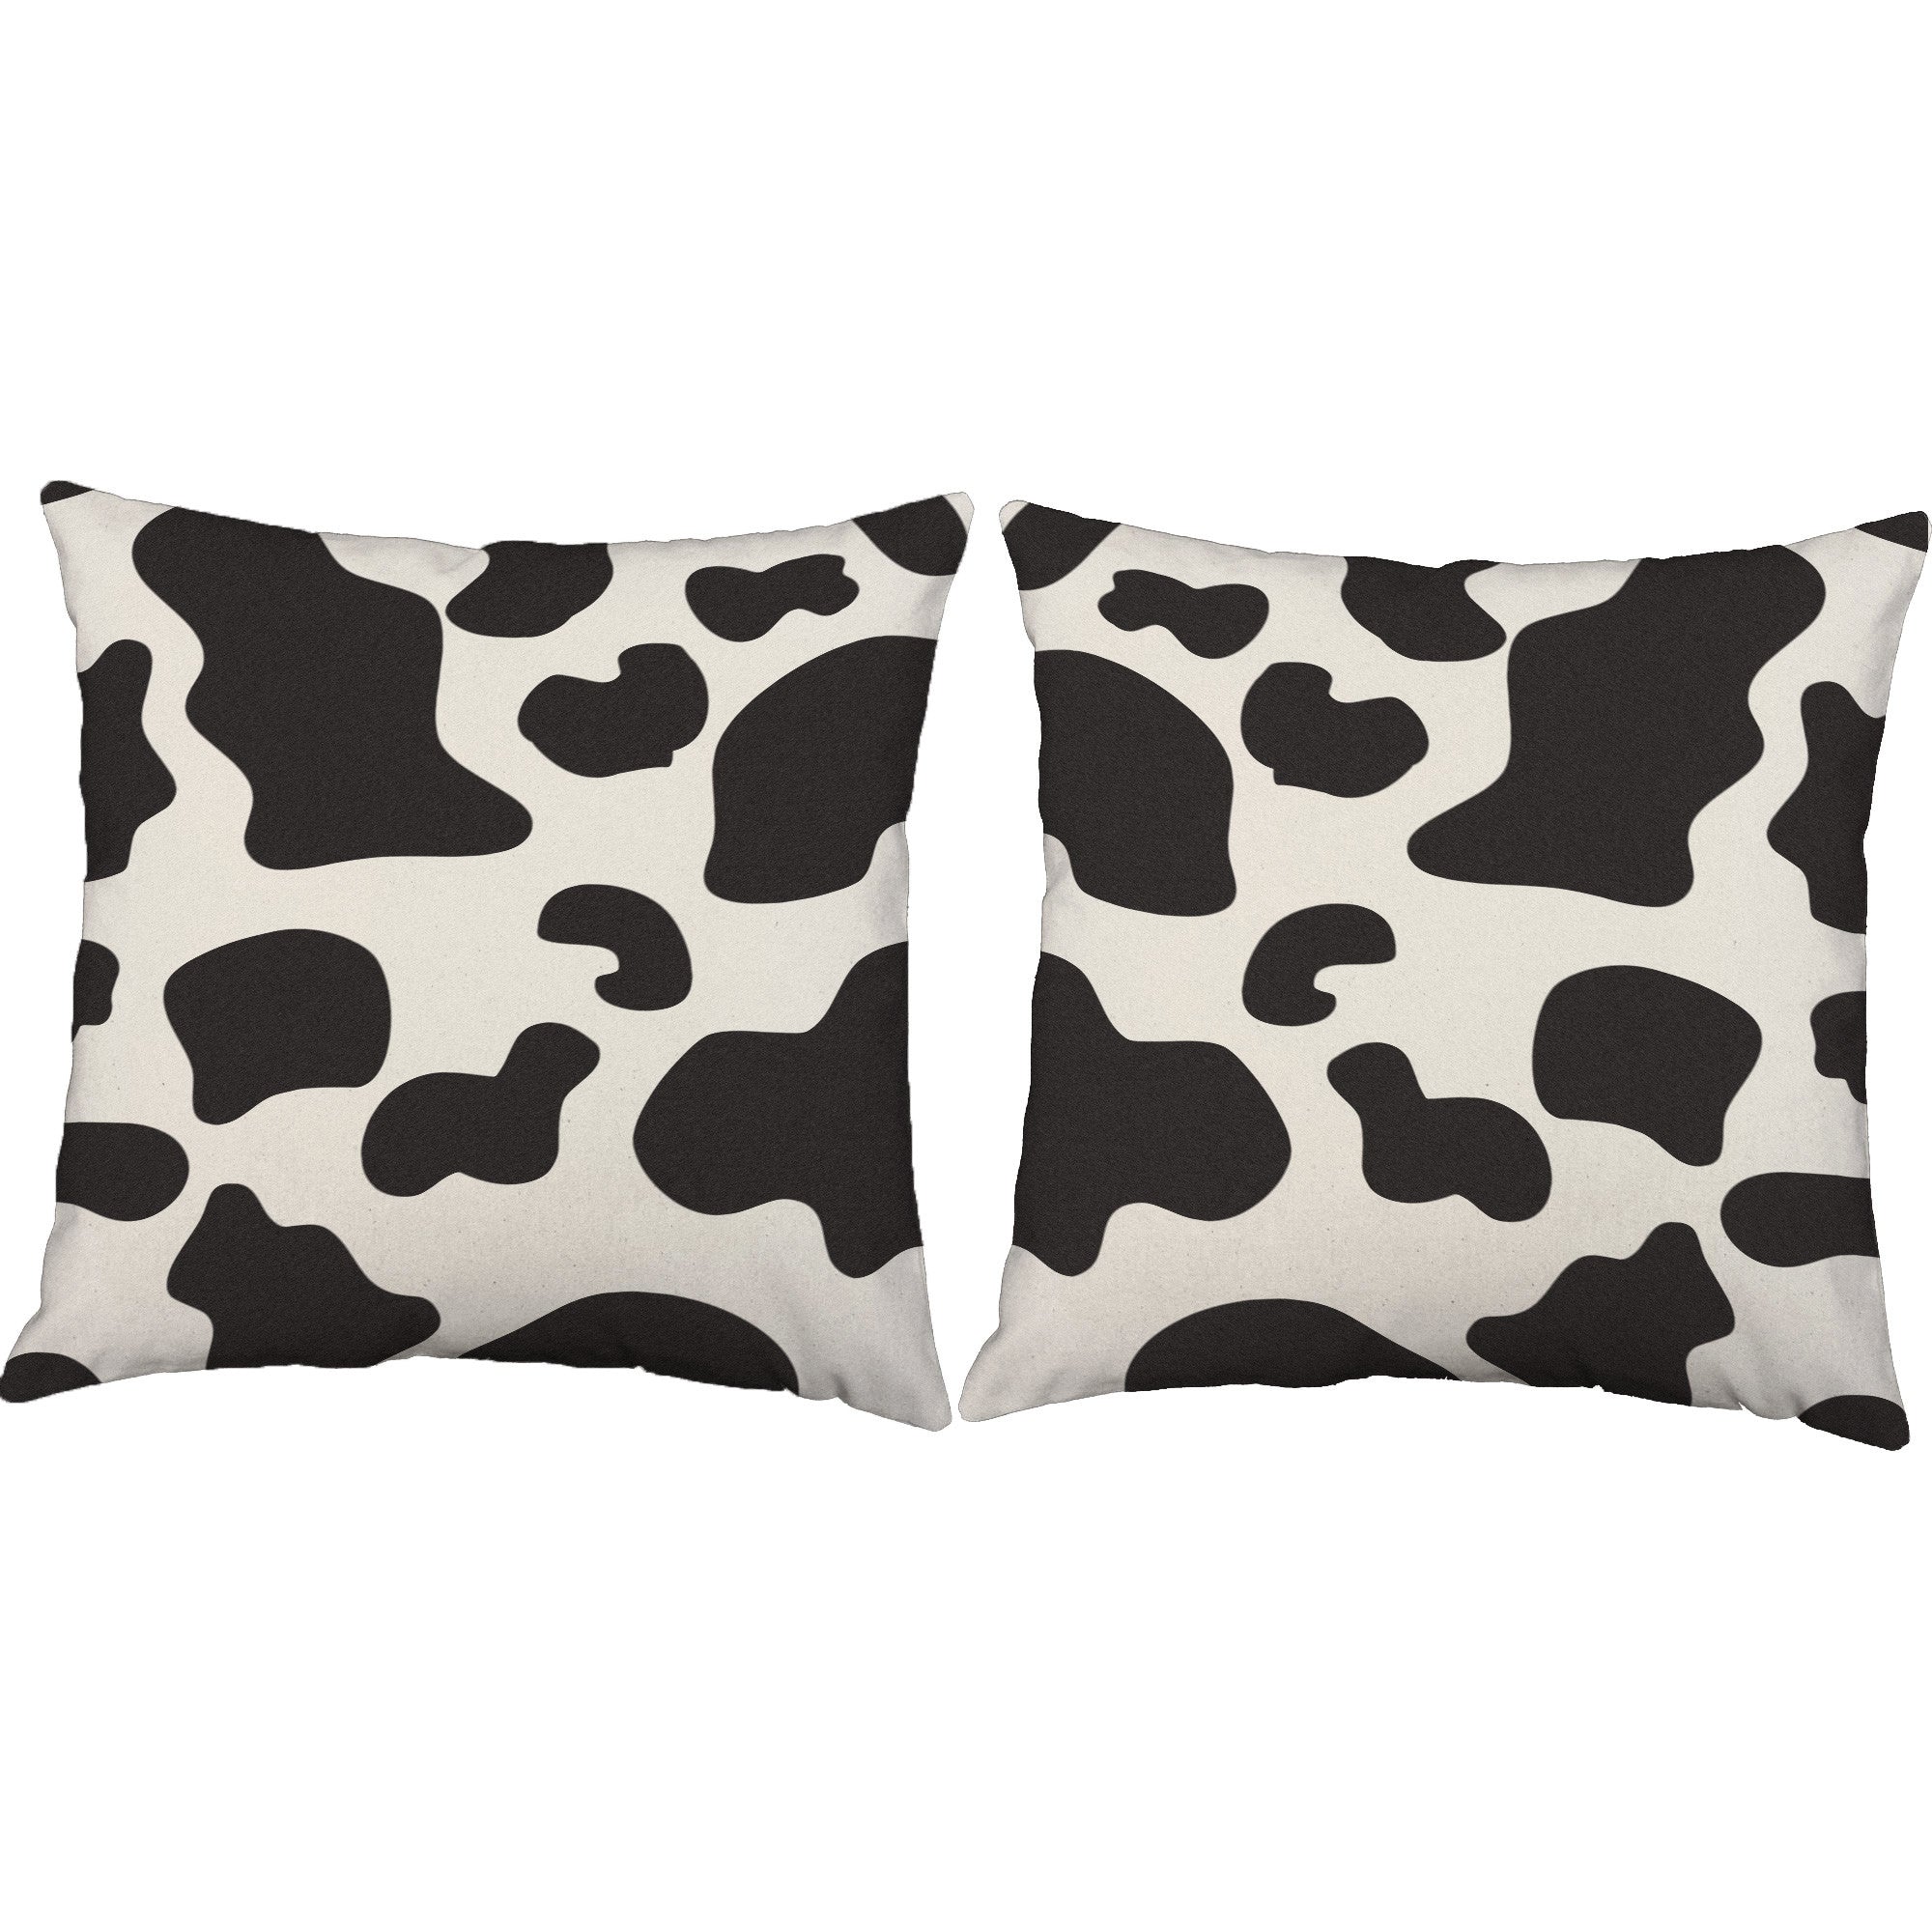 Cow Print Accent Throw Pillows Cowhide Animal Square Pillows